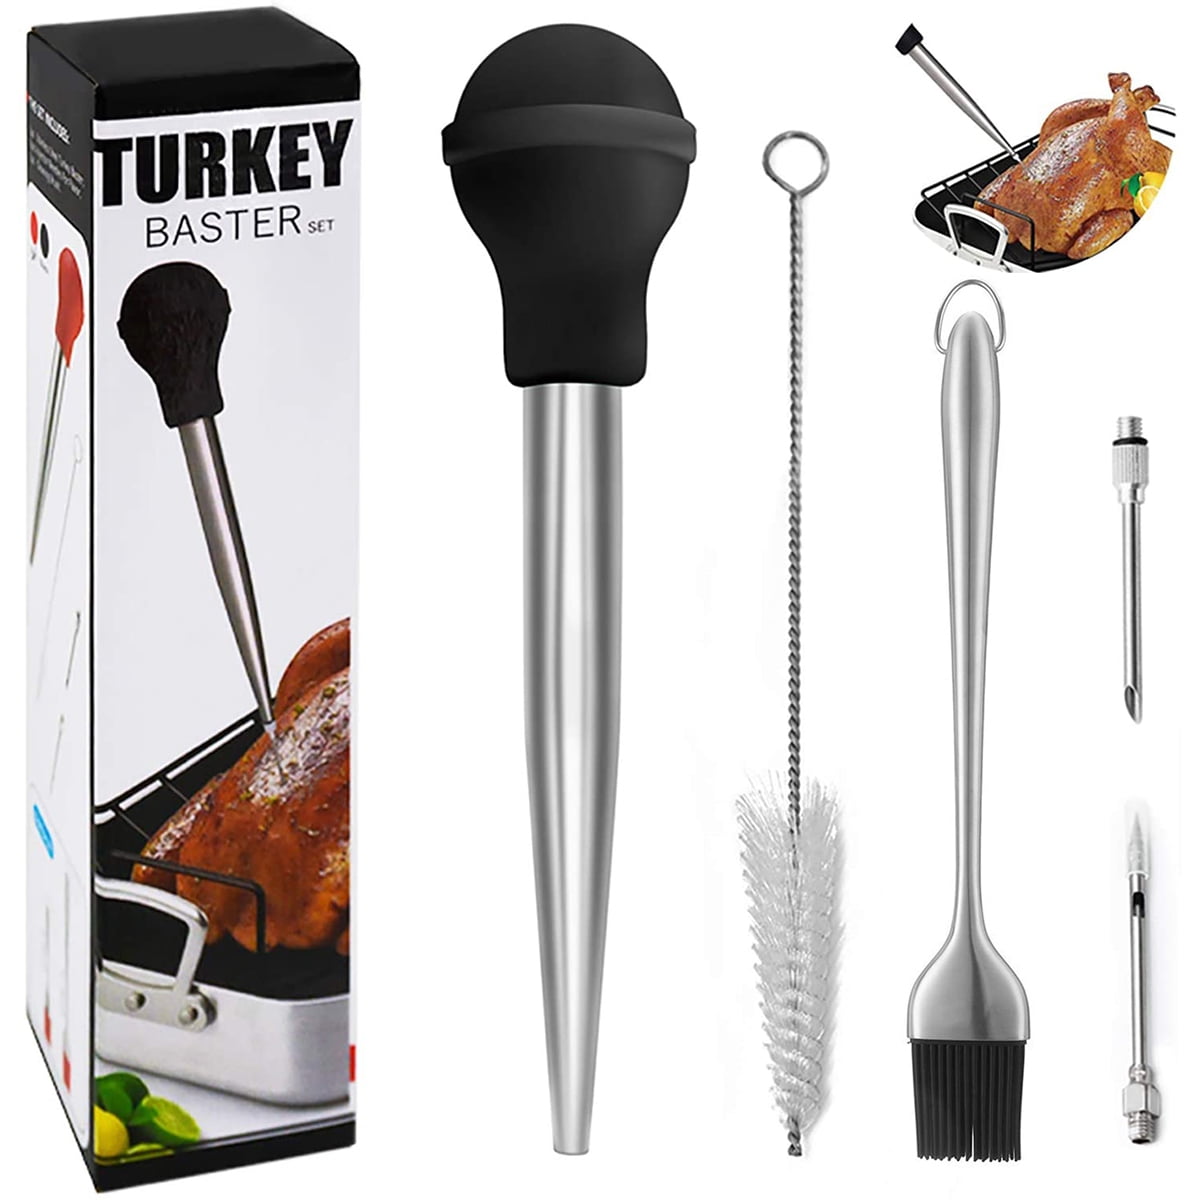 Turkey Baster BBQ Syringe for Cooking Meat, Stainless Steel BBQ